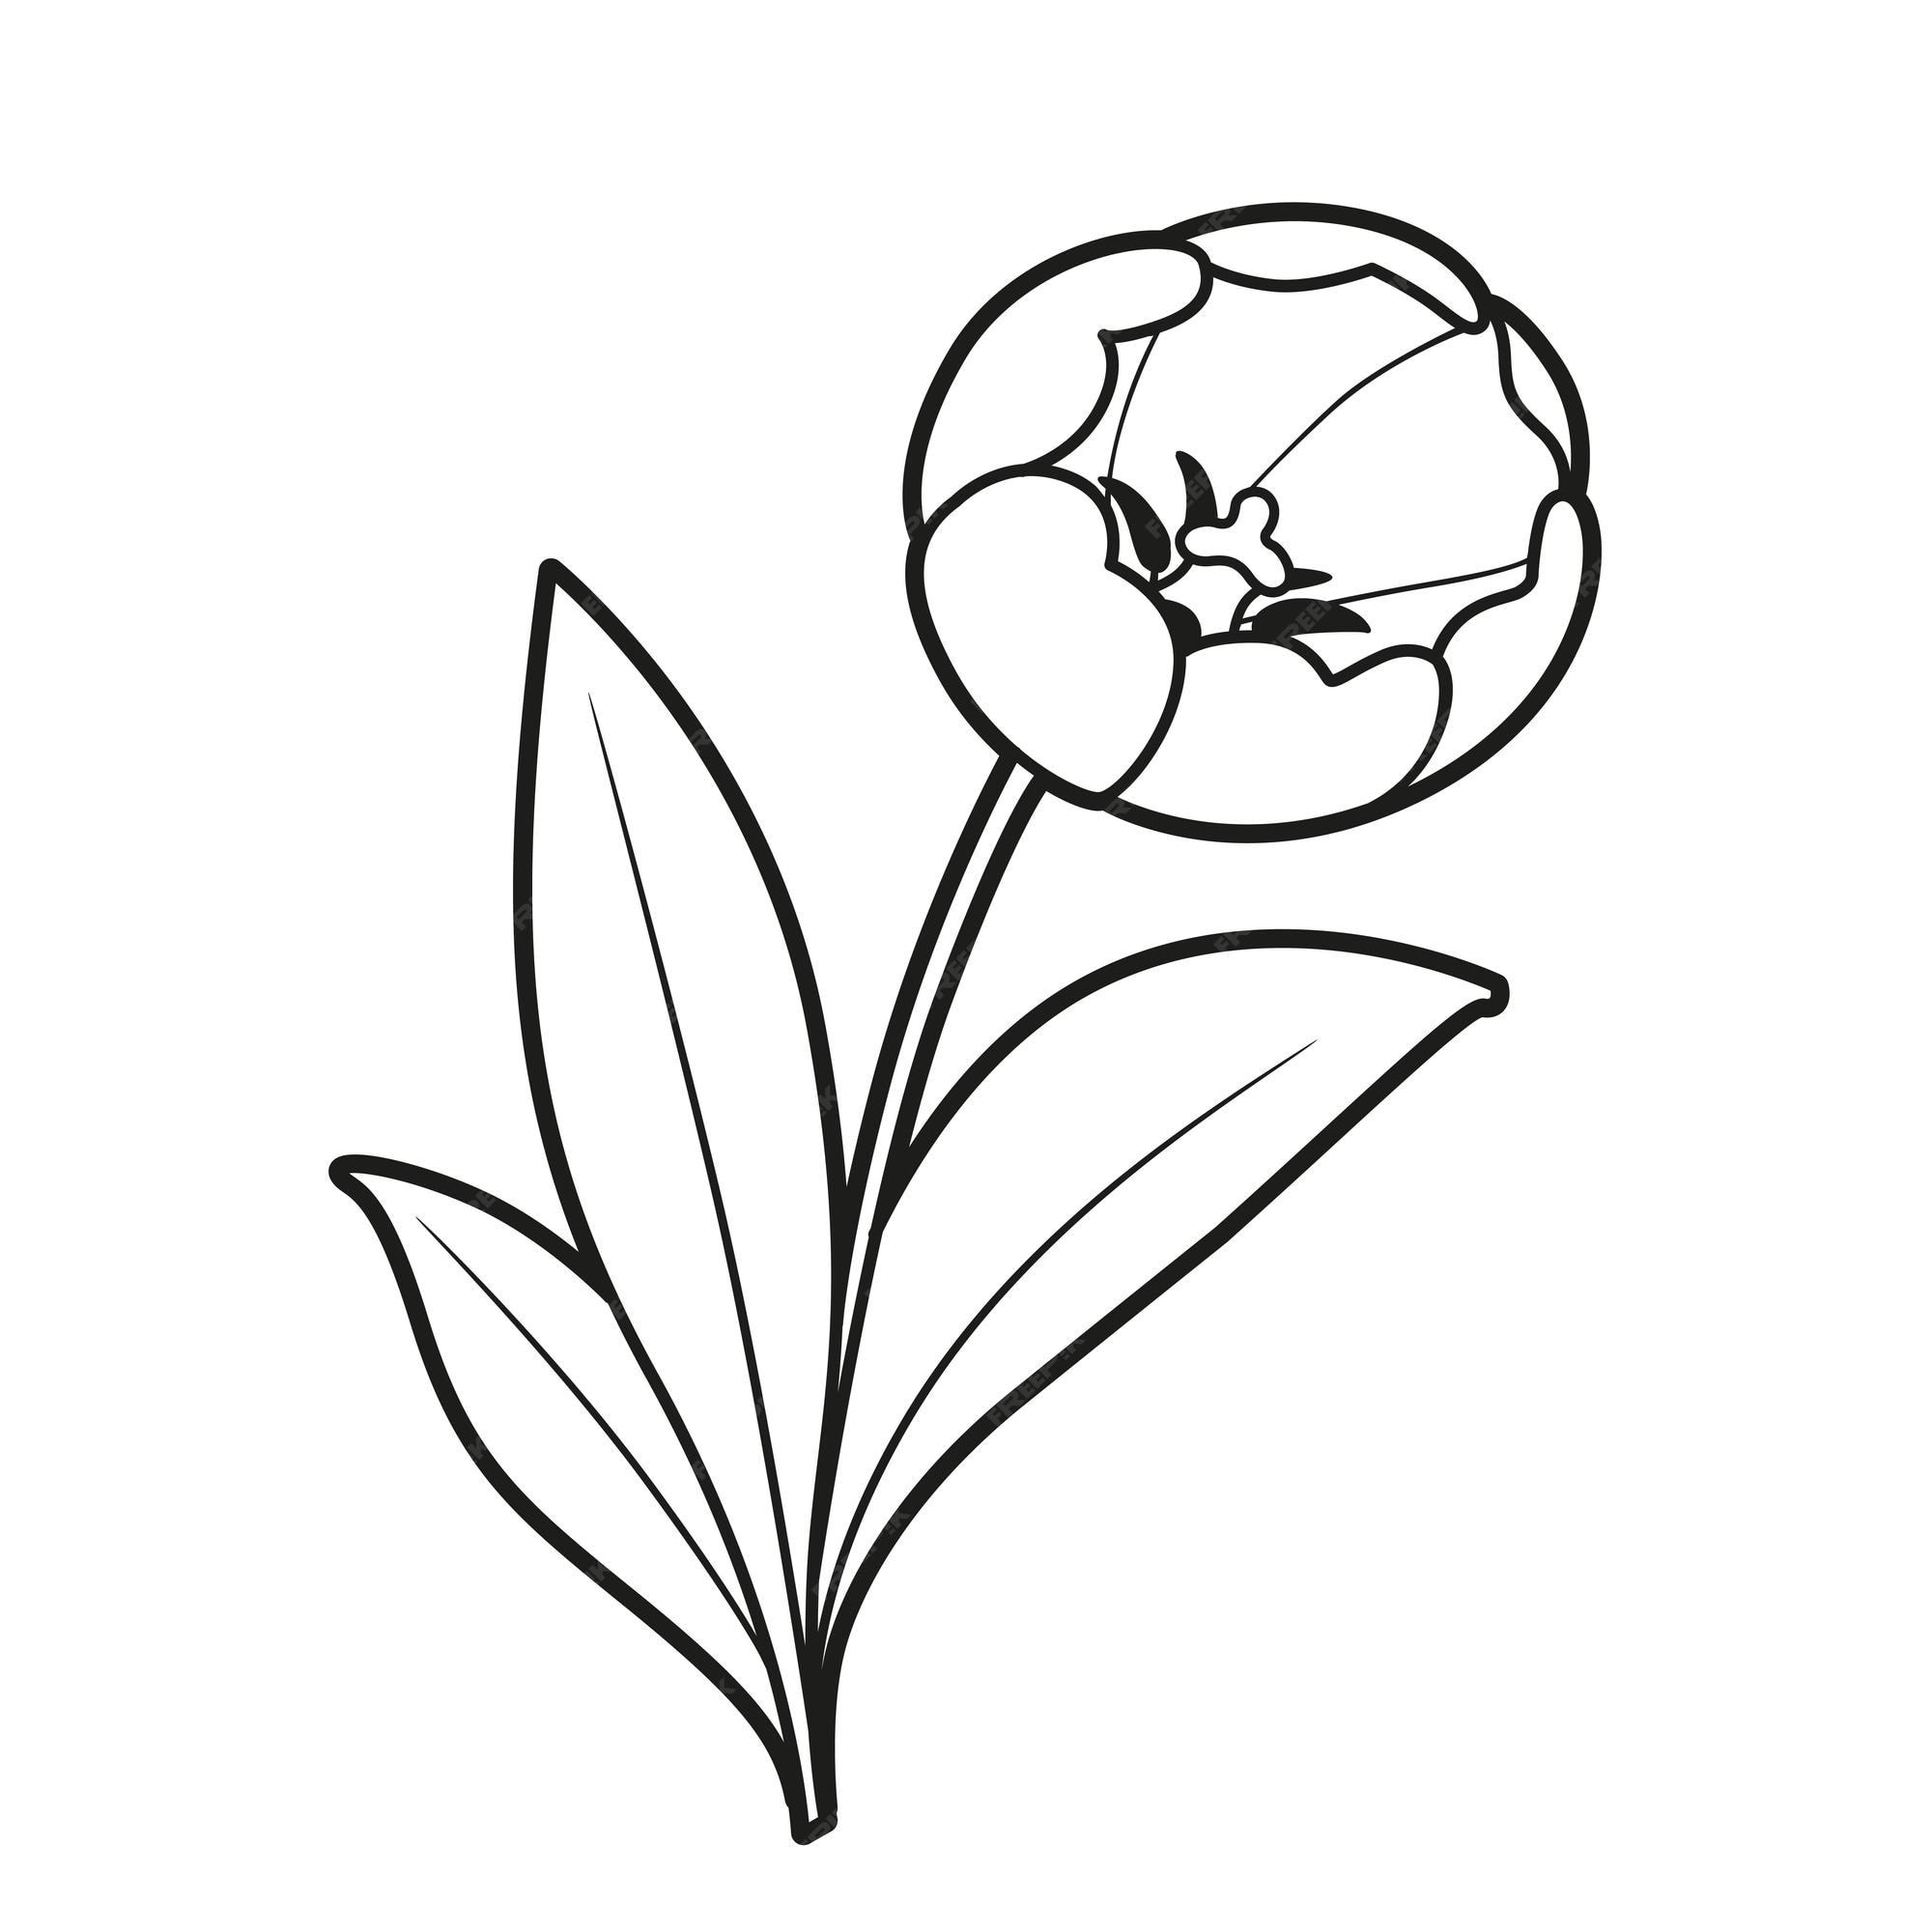 Premium vector tulip flower coloring book linear drawing isolated on white background